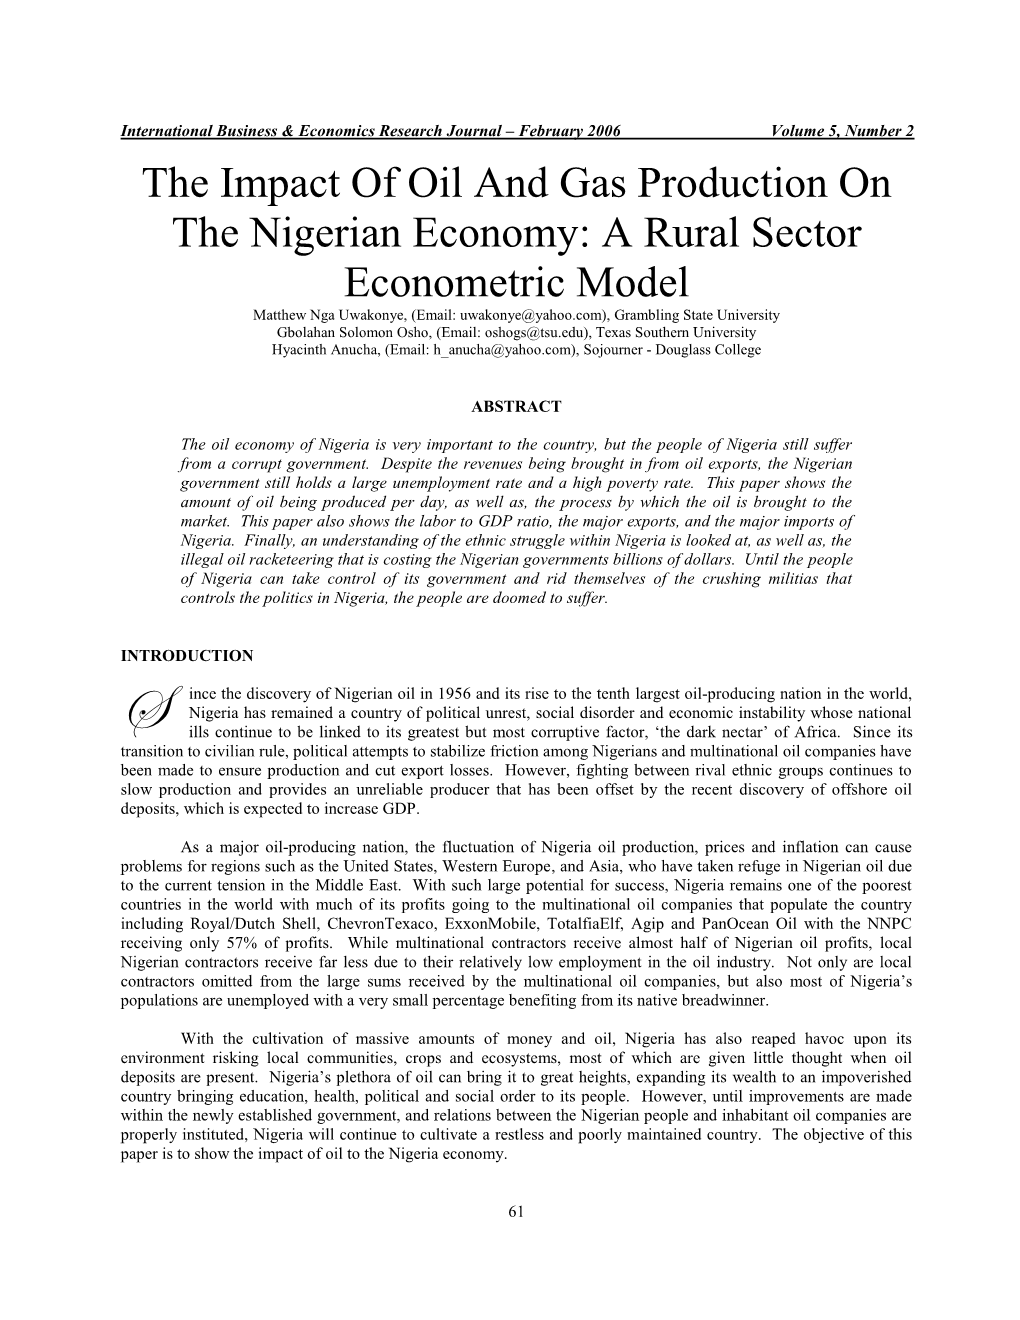 The Impact of Oil Production on the Nigerian Economy